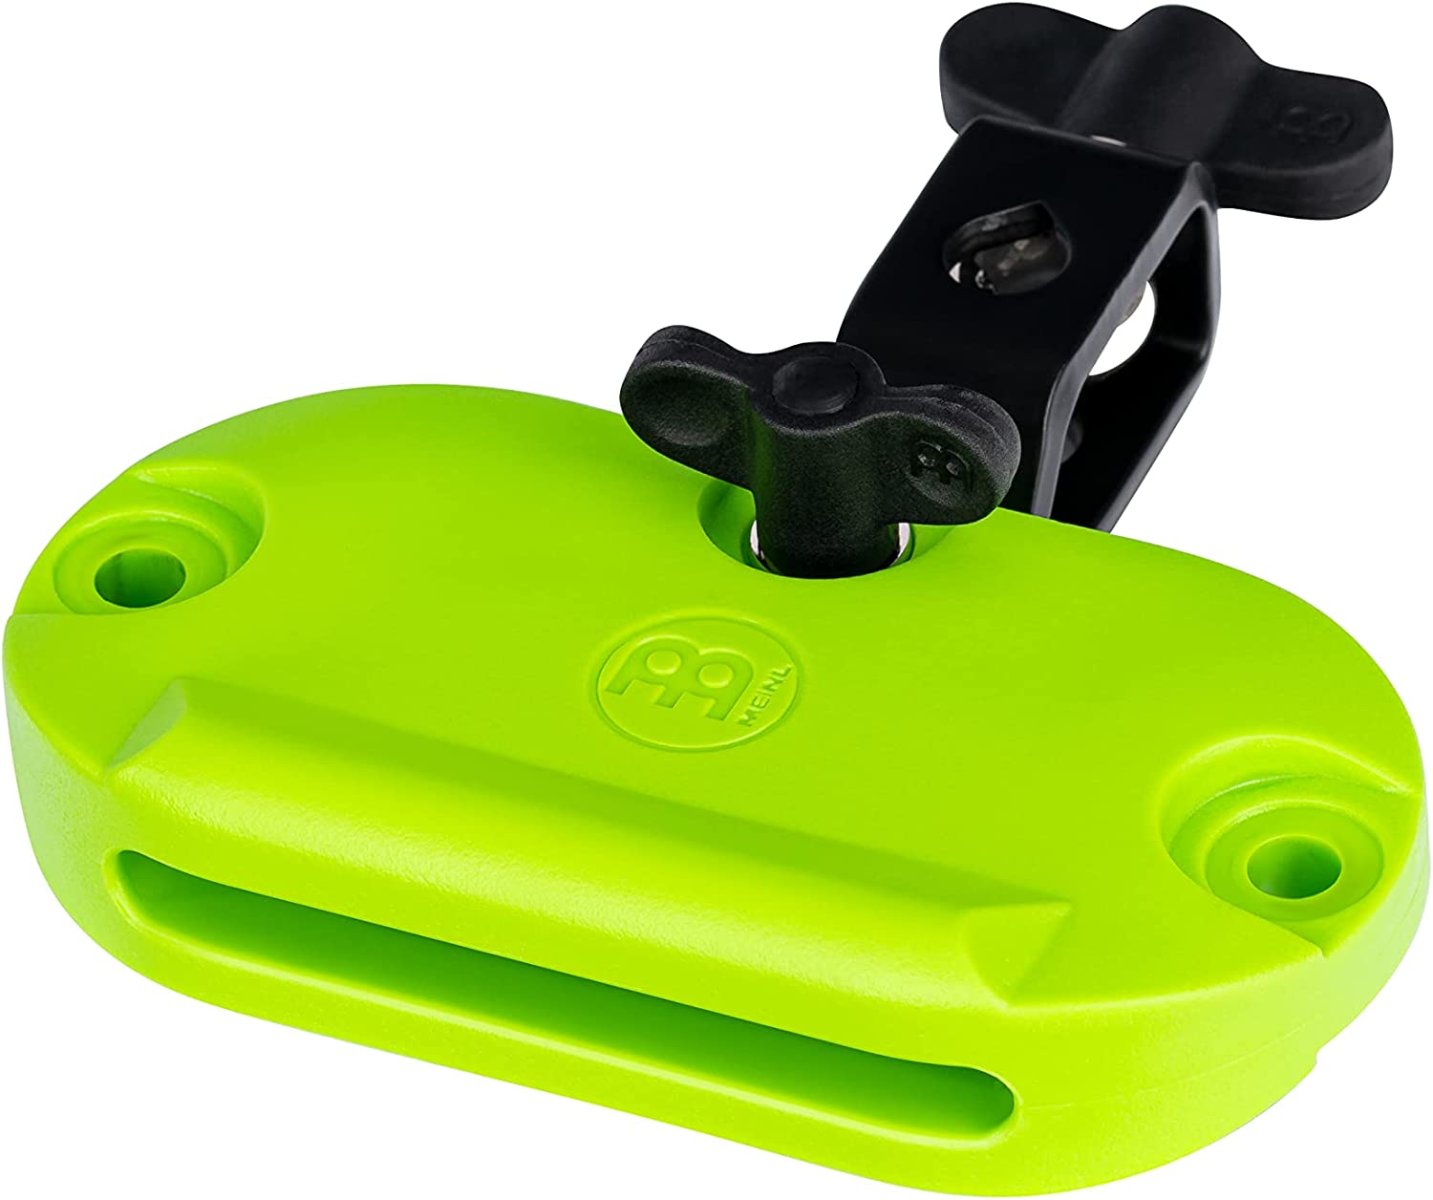 Meinl MPE5NG Percussion Block with Adjustable Mount - High Pitch